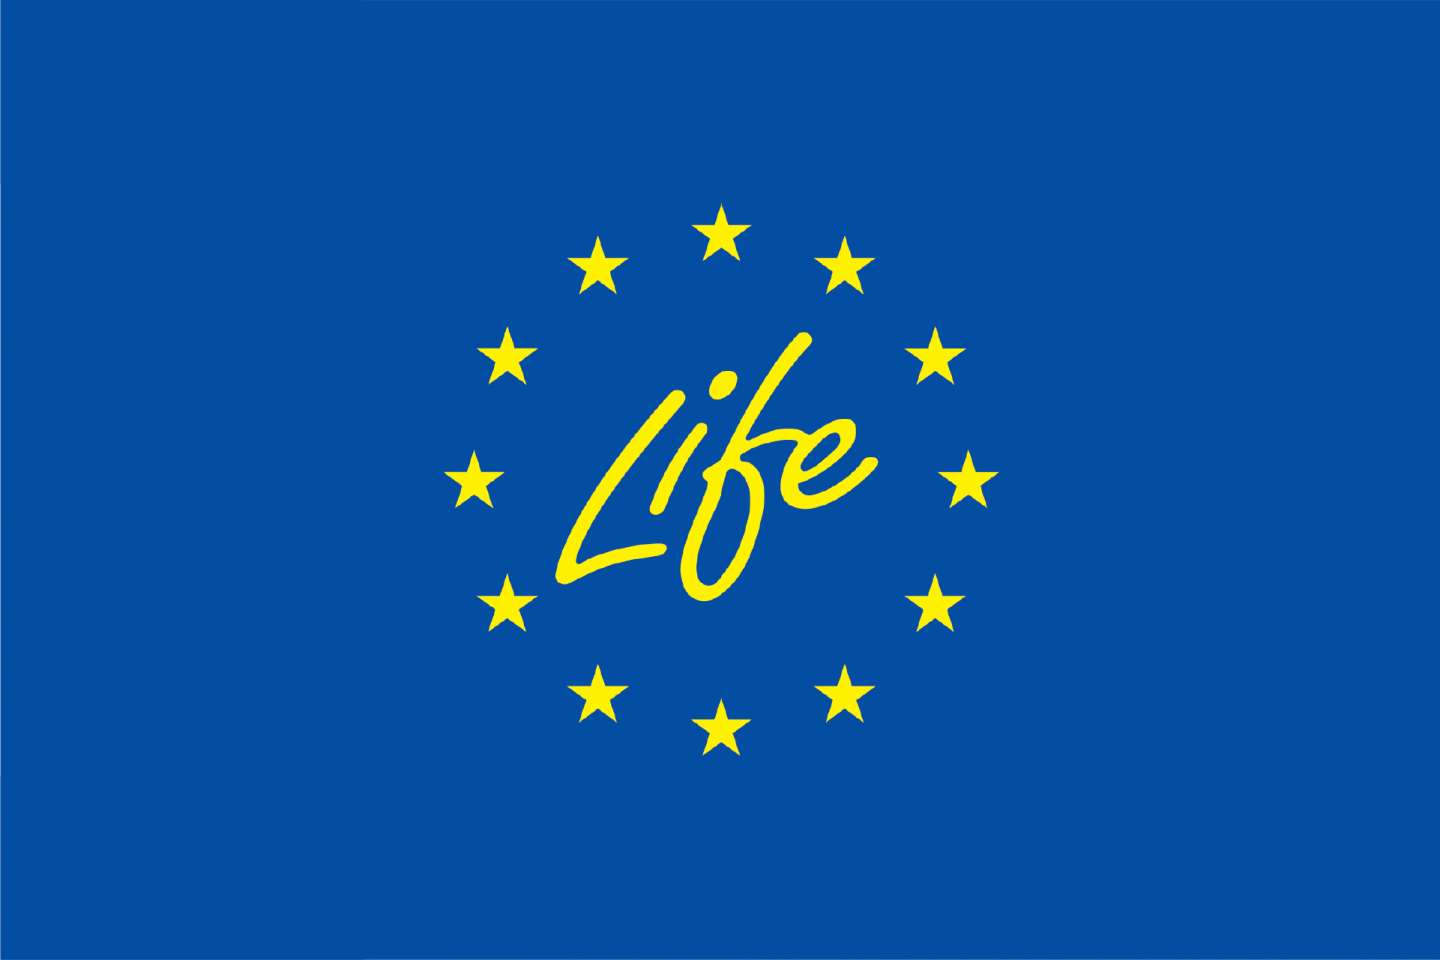 European Commission informs about LIFE Energy project